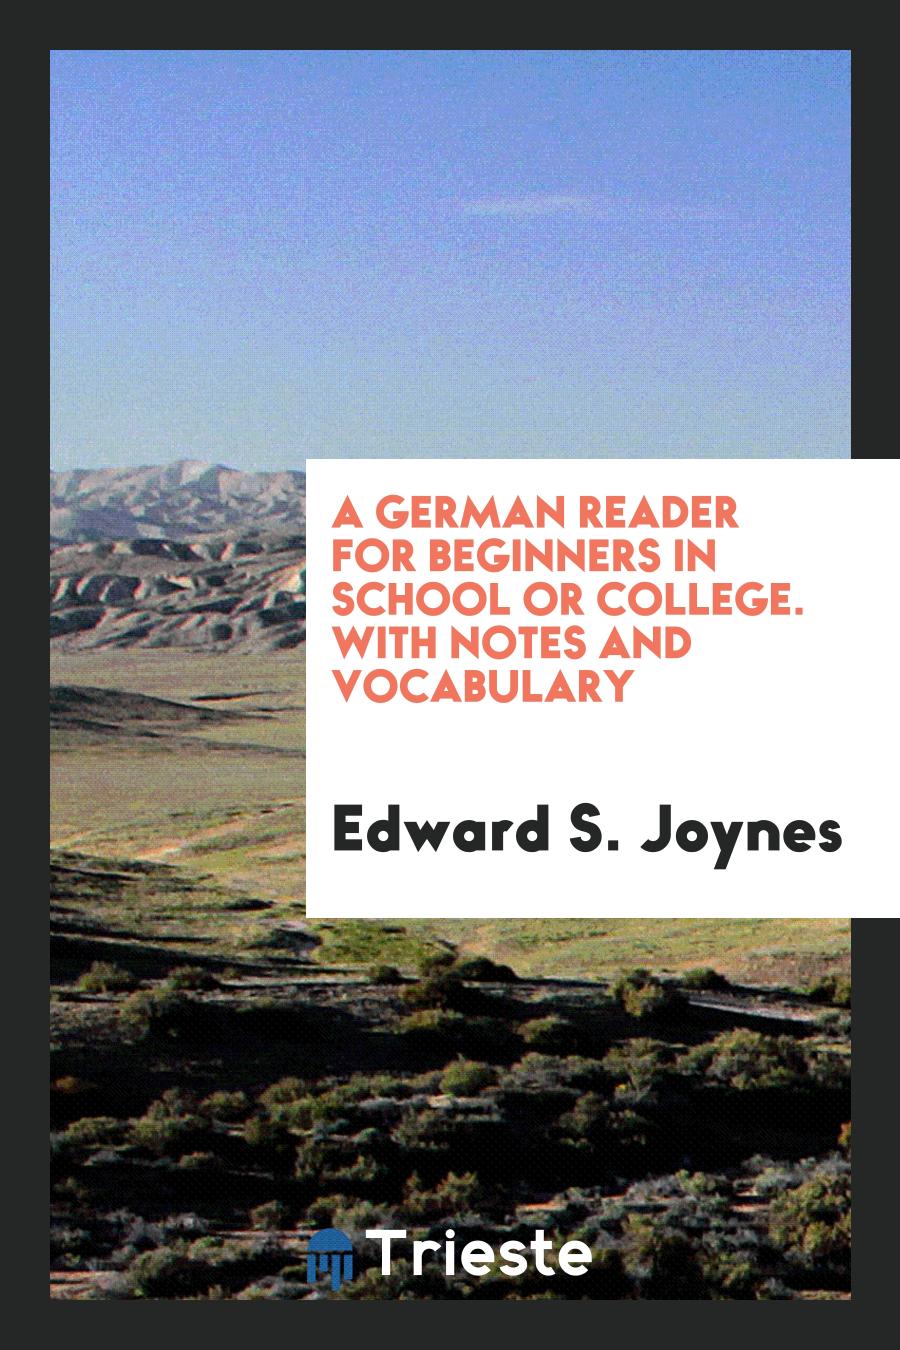 A German Reader for Beginners in School or College. With Notes and Vocabulary